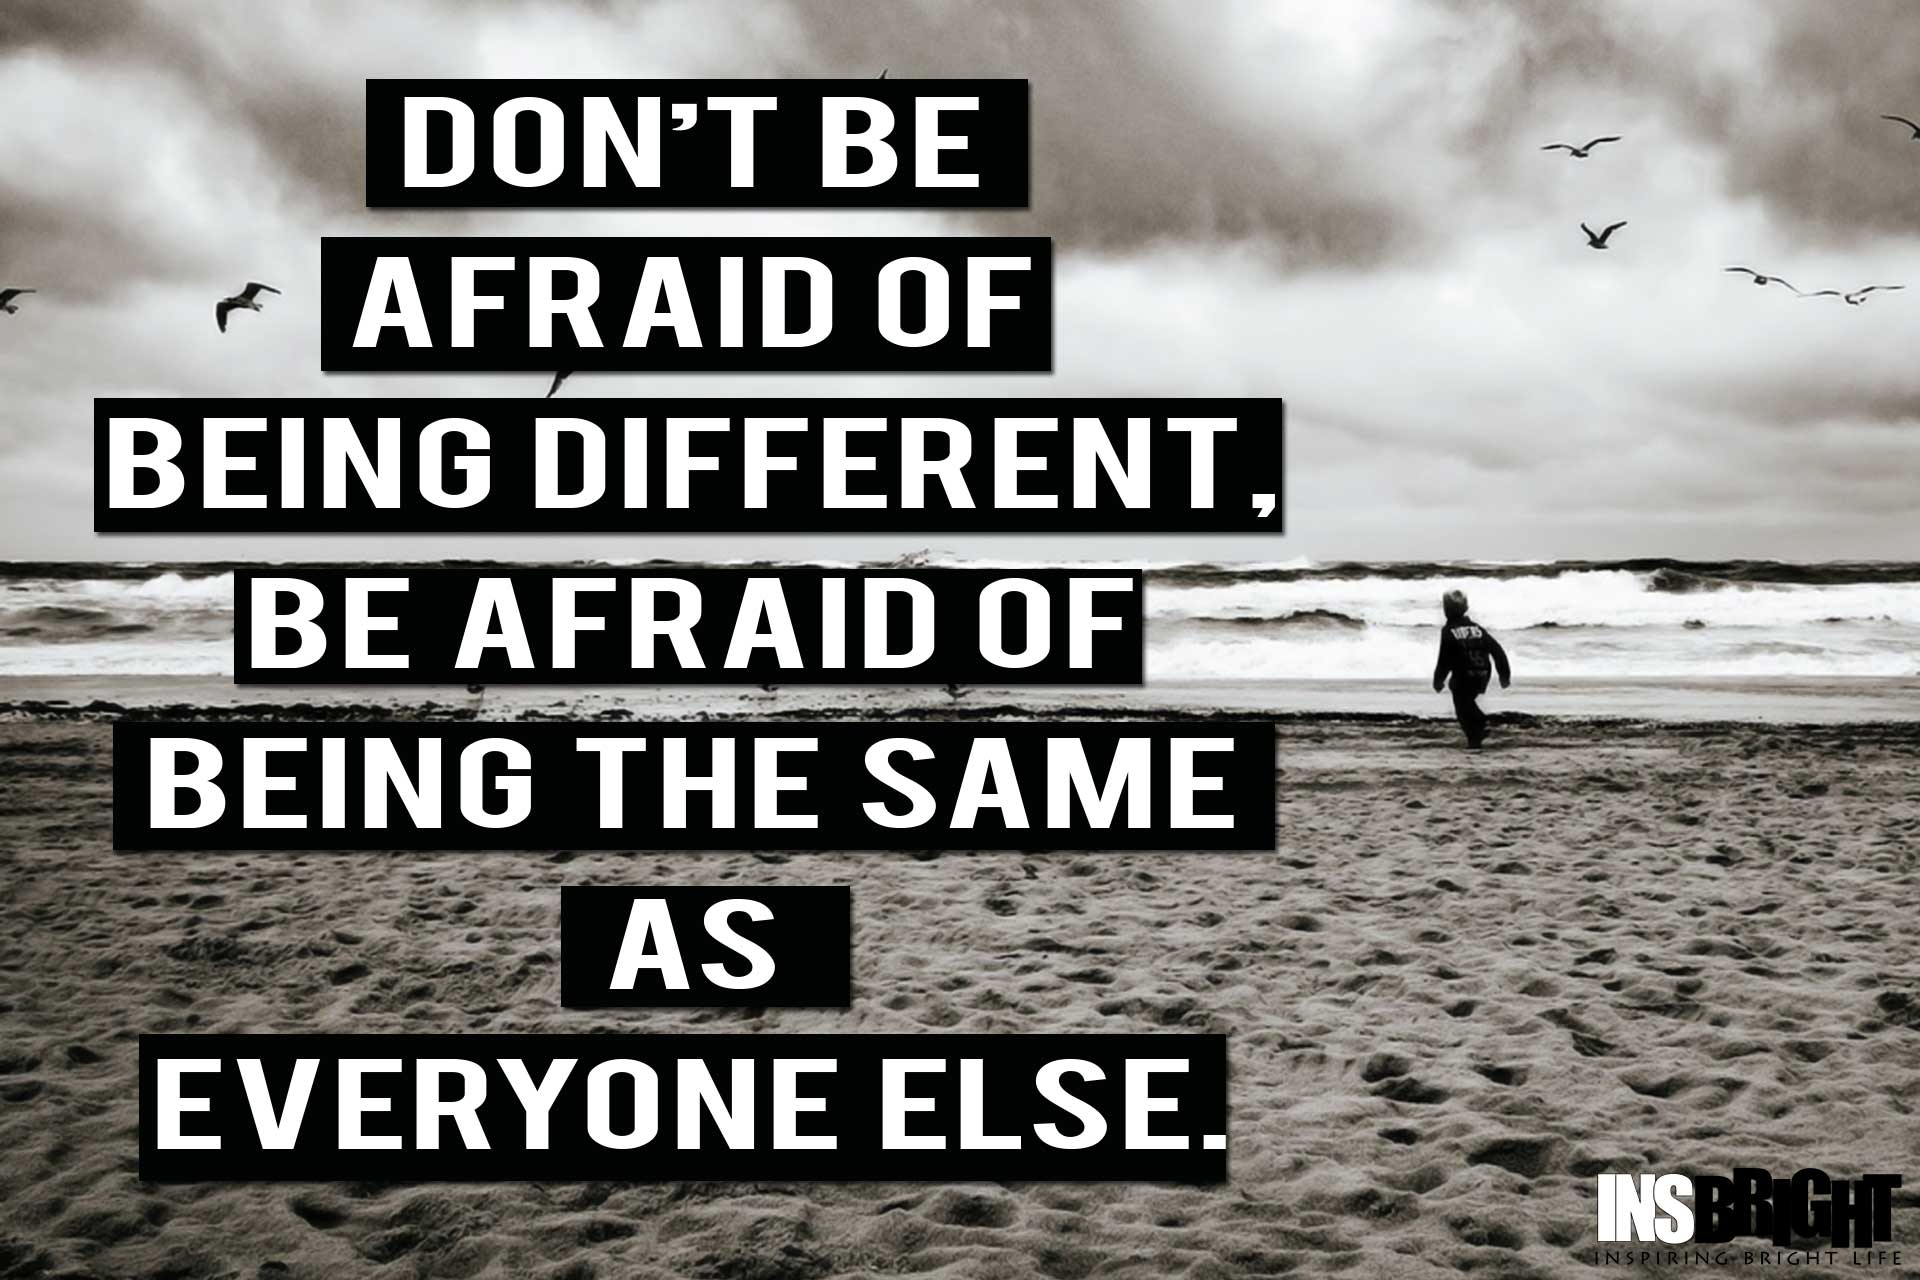 Don't be afraid of being different. Be afraid of being the same as everyone else